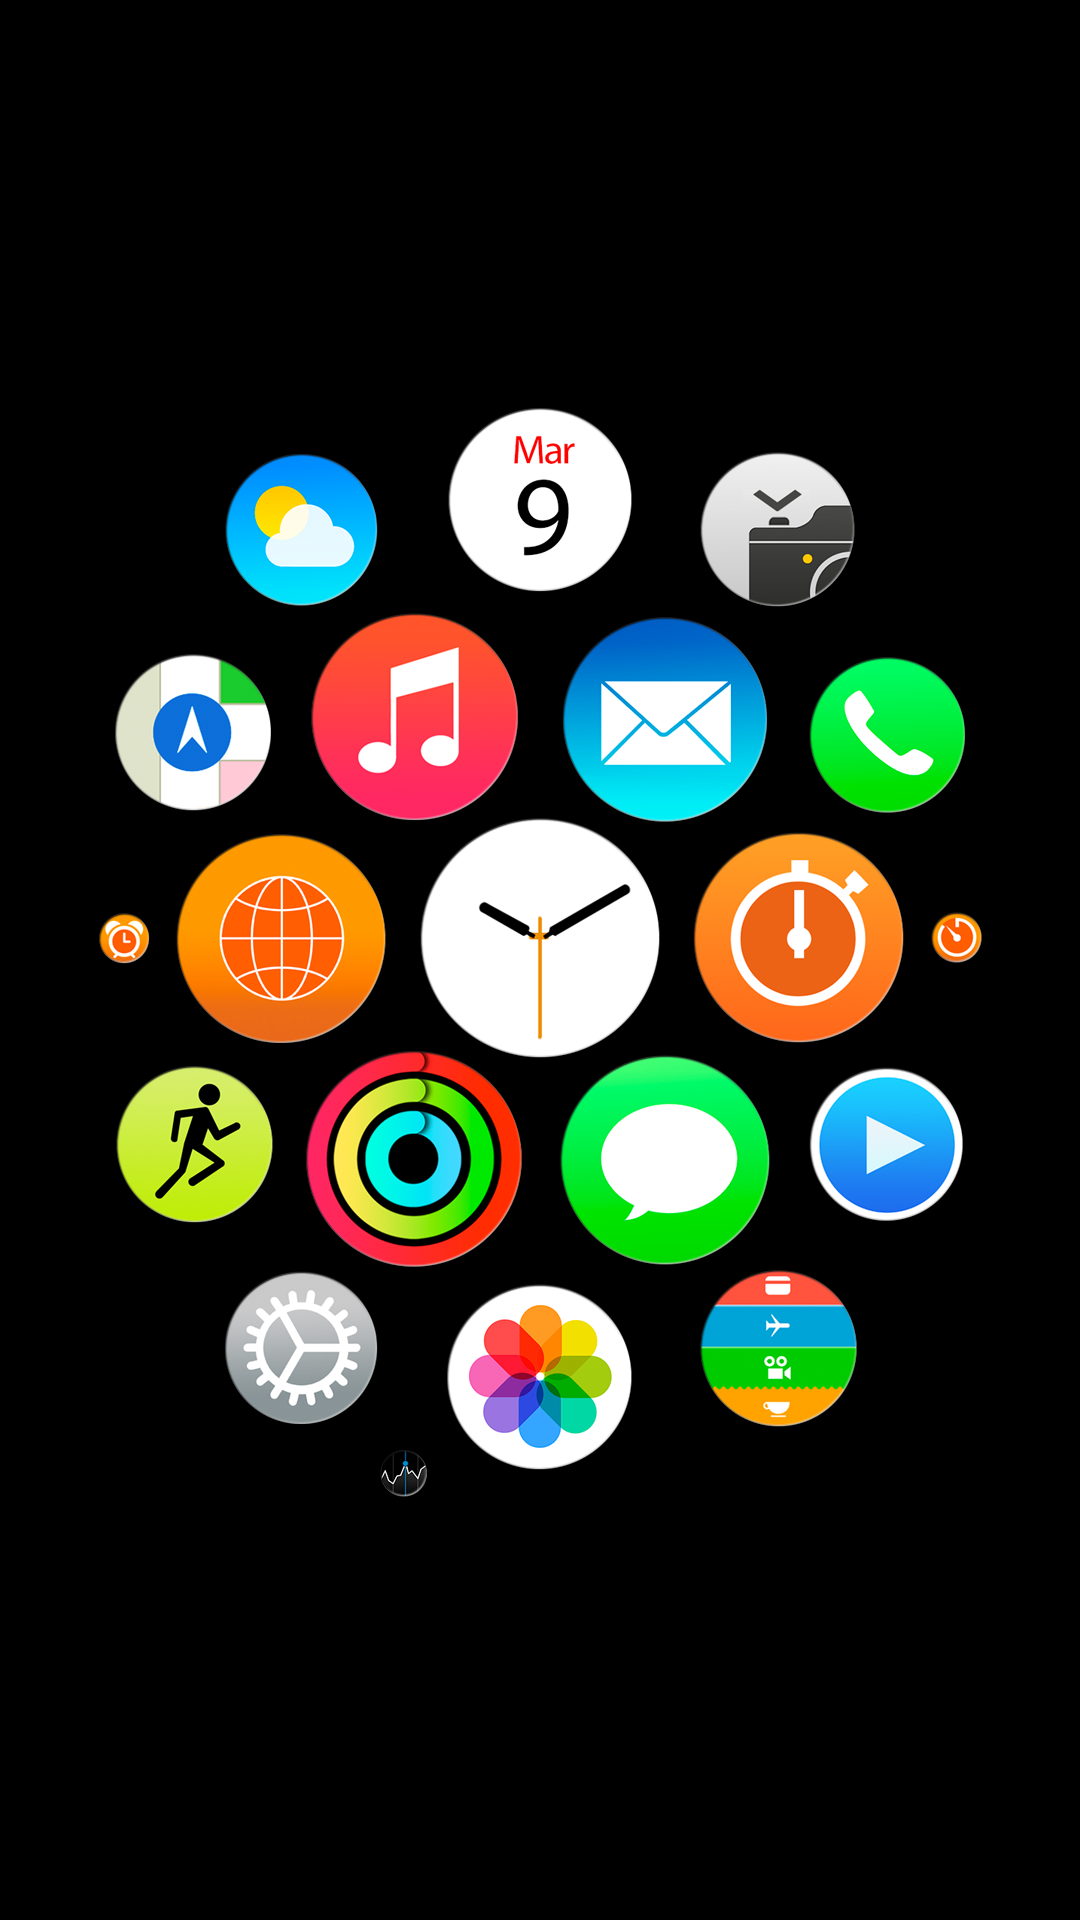 Apple Watch app icons wallpapers for iPhone, iPad, and desktop